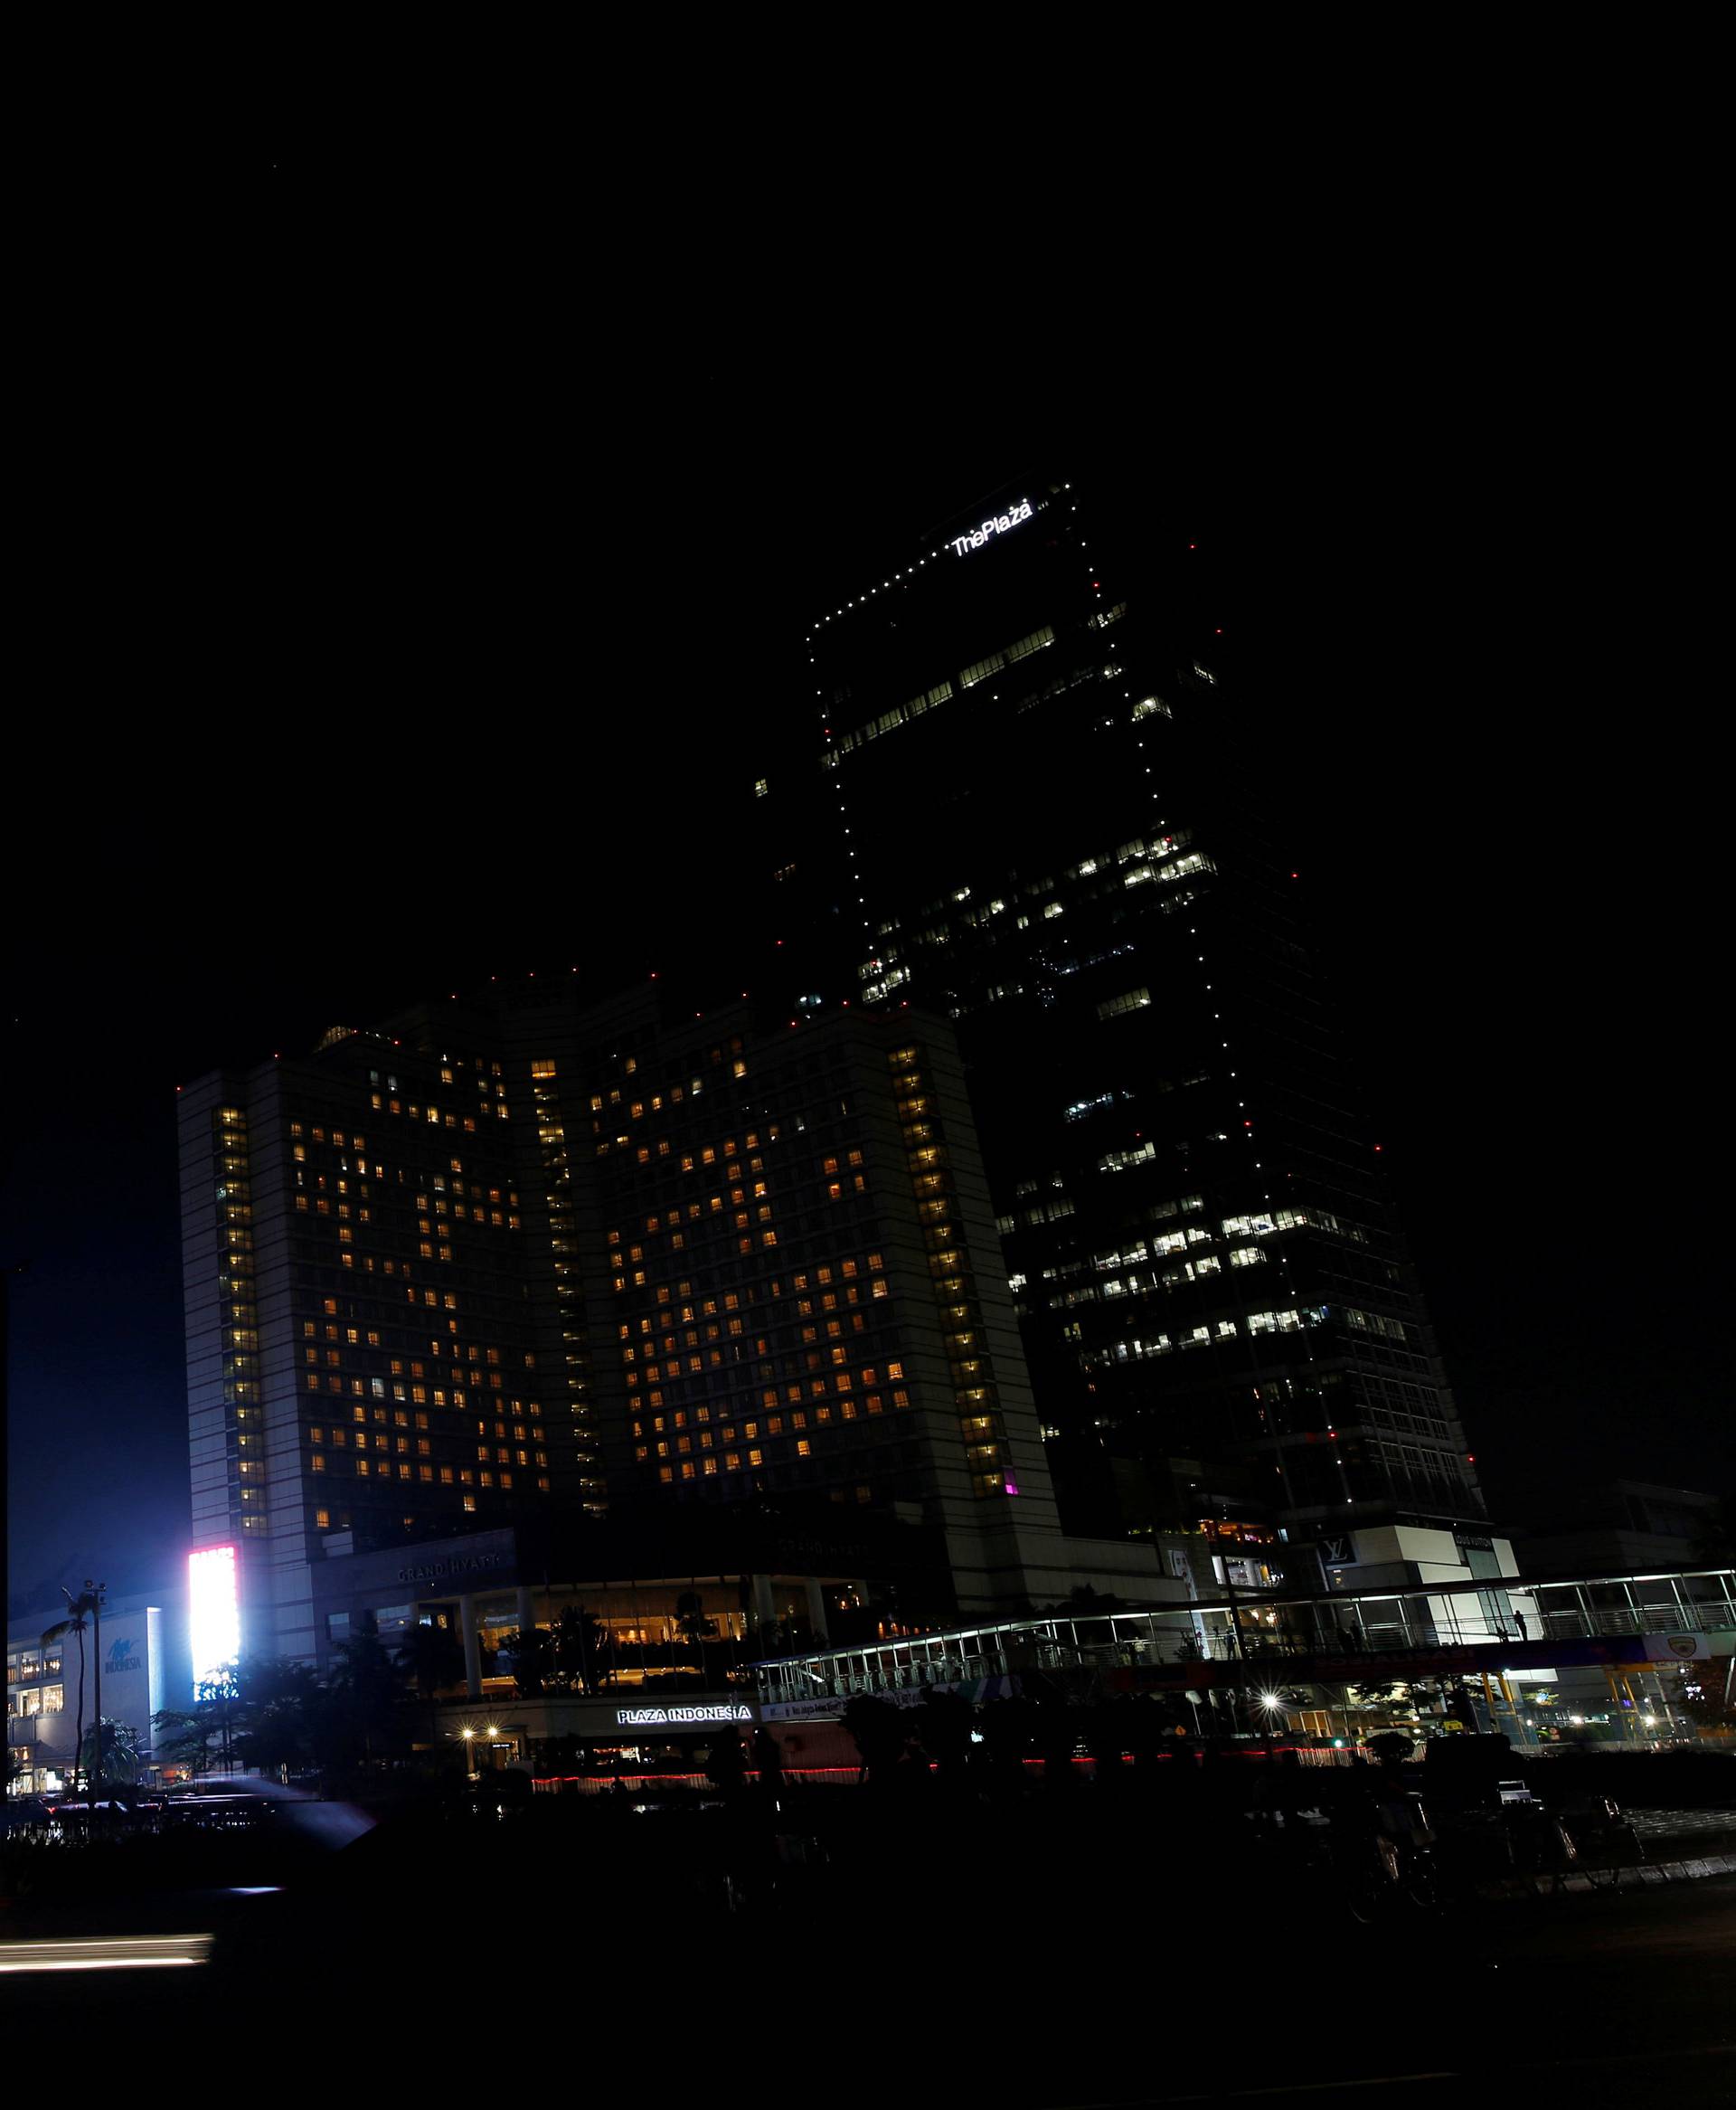 The area around Selamat Datang Monument, also referred to as the Bunderan HI roundabout, is pictured after the lights were switched off for Earth Hour in Jakarta